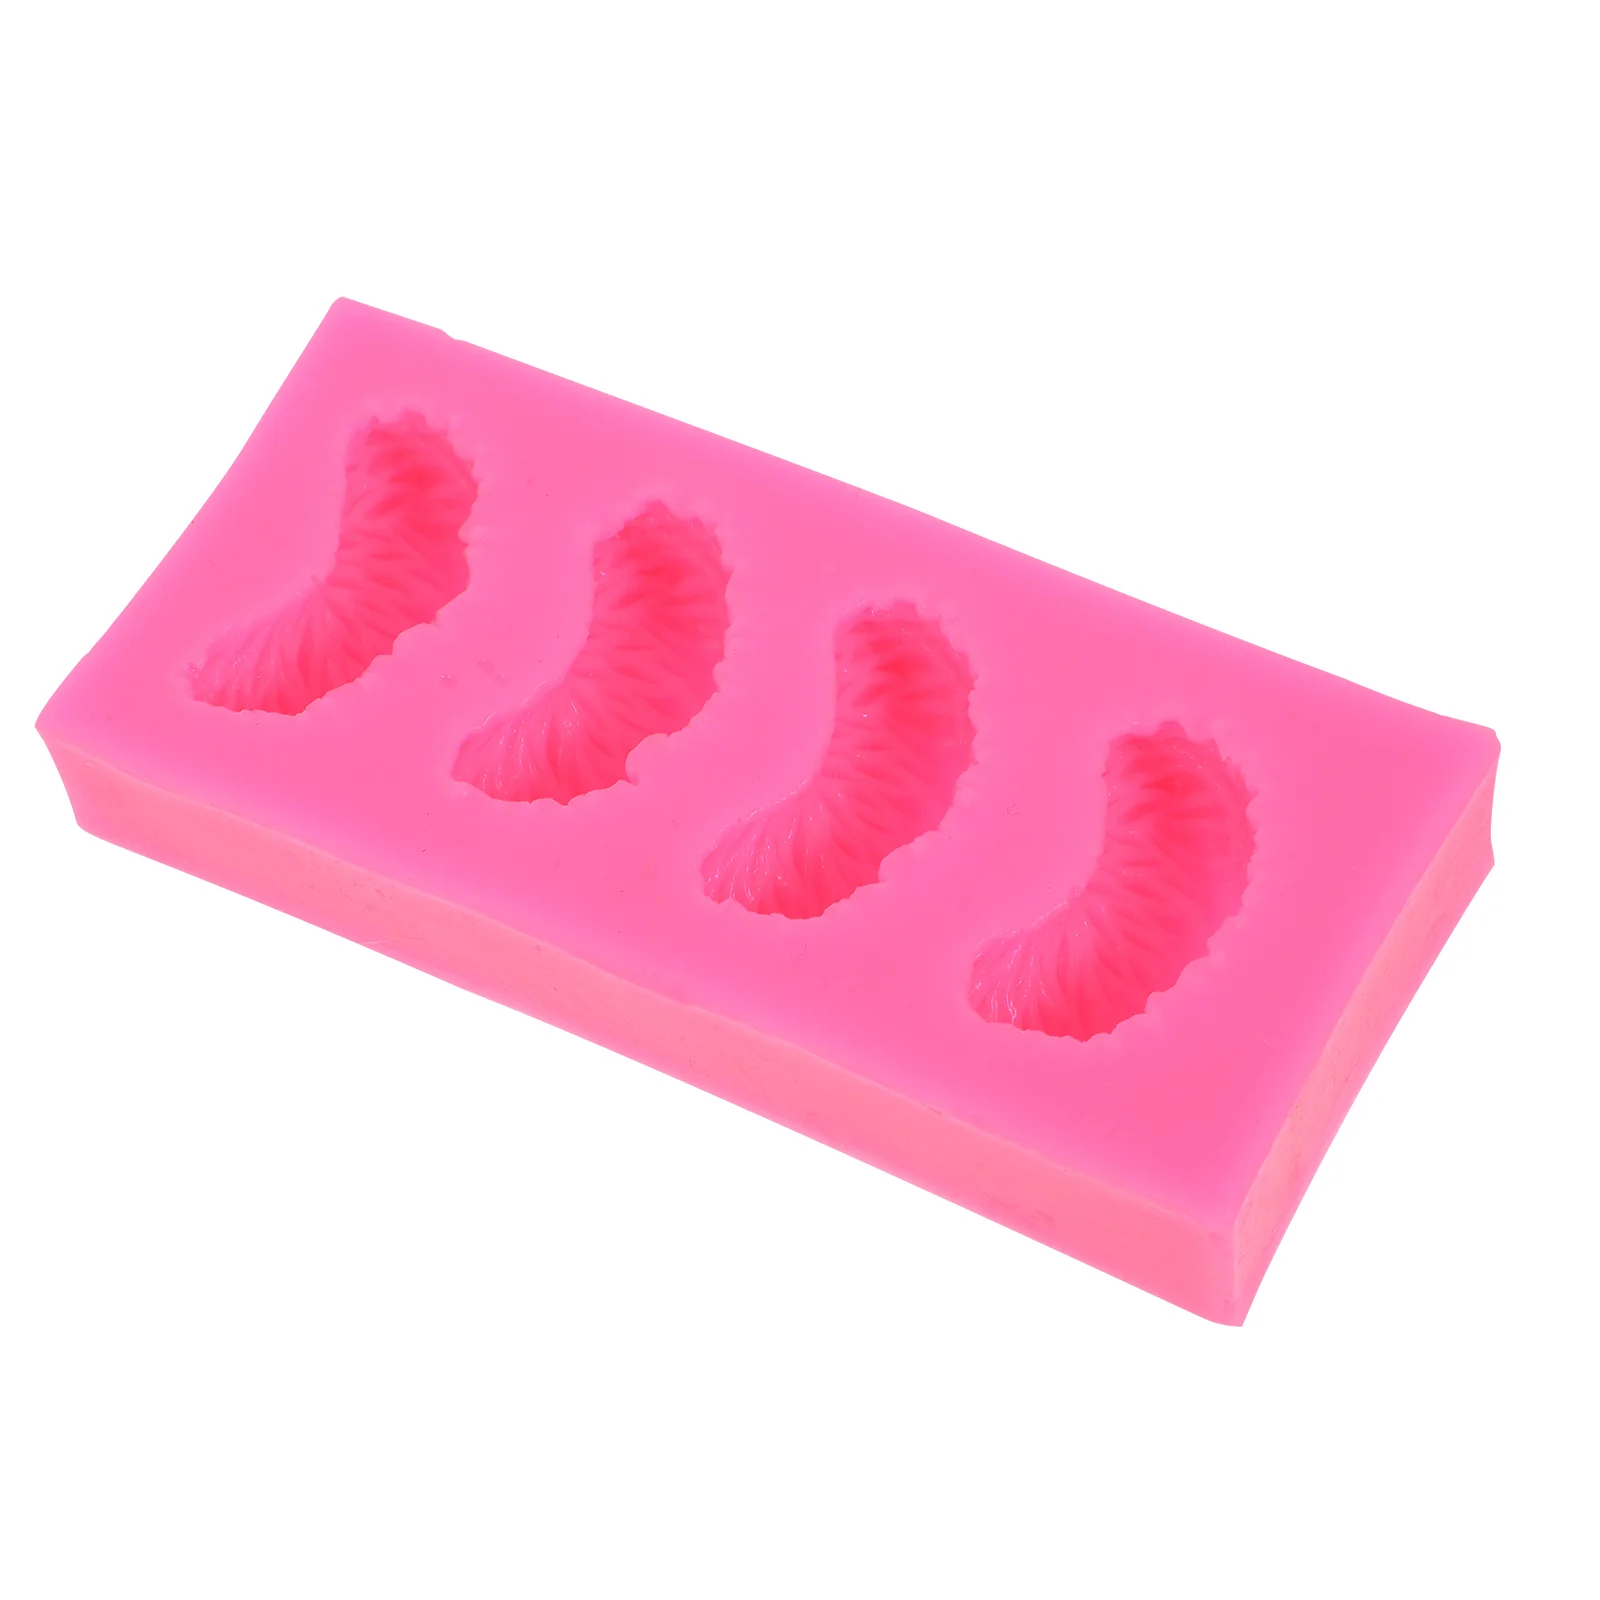 

Fruit Mold Fondant Tools Cookie Baking Molds Clay Chocolate DIY Candy Silica Gel Silicone Adult